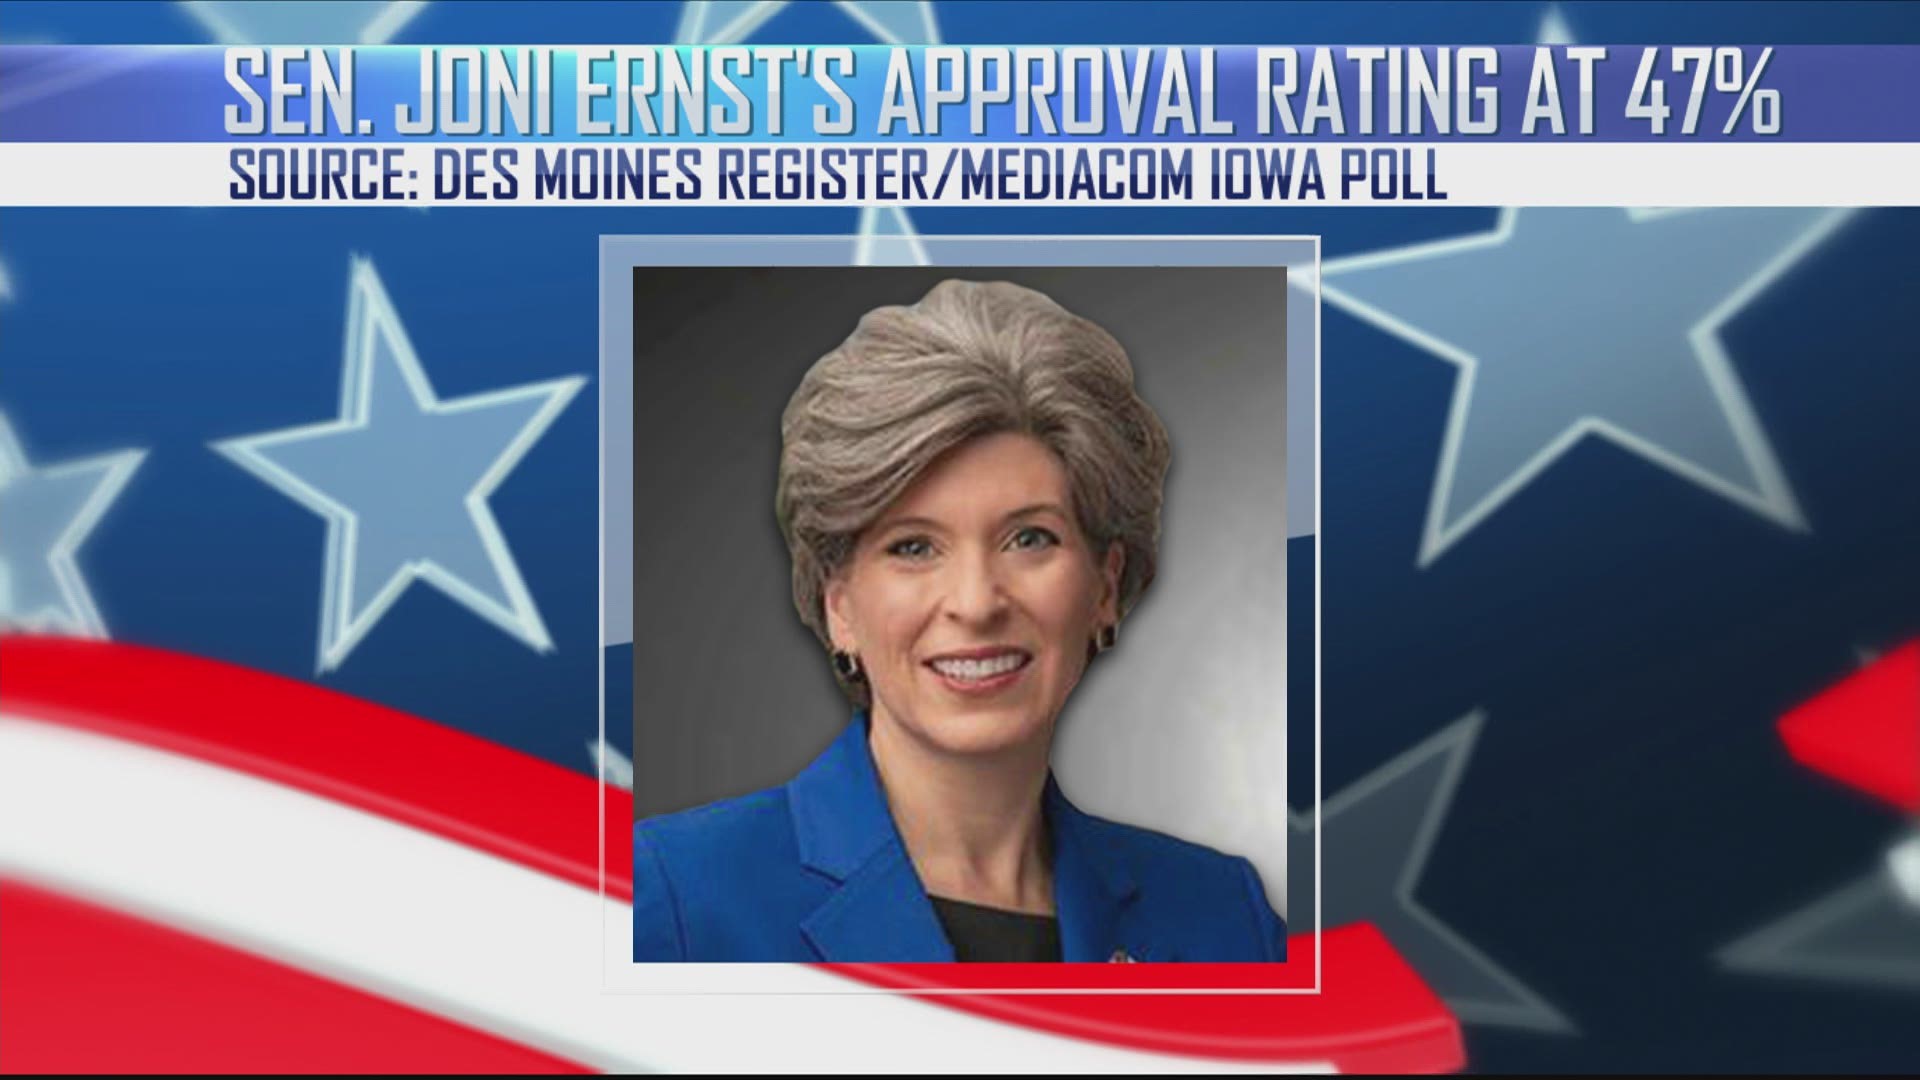 Her approval rating has dipped 10 points in the last year.